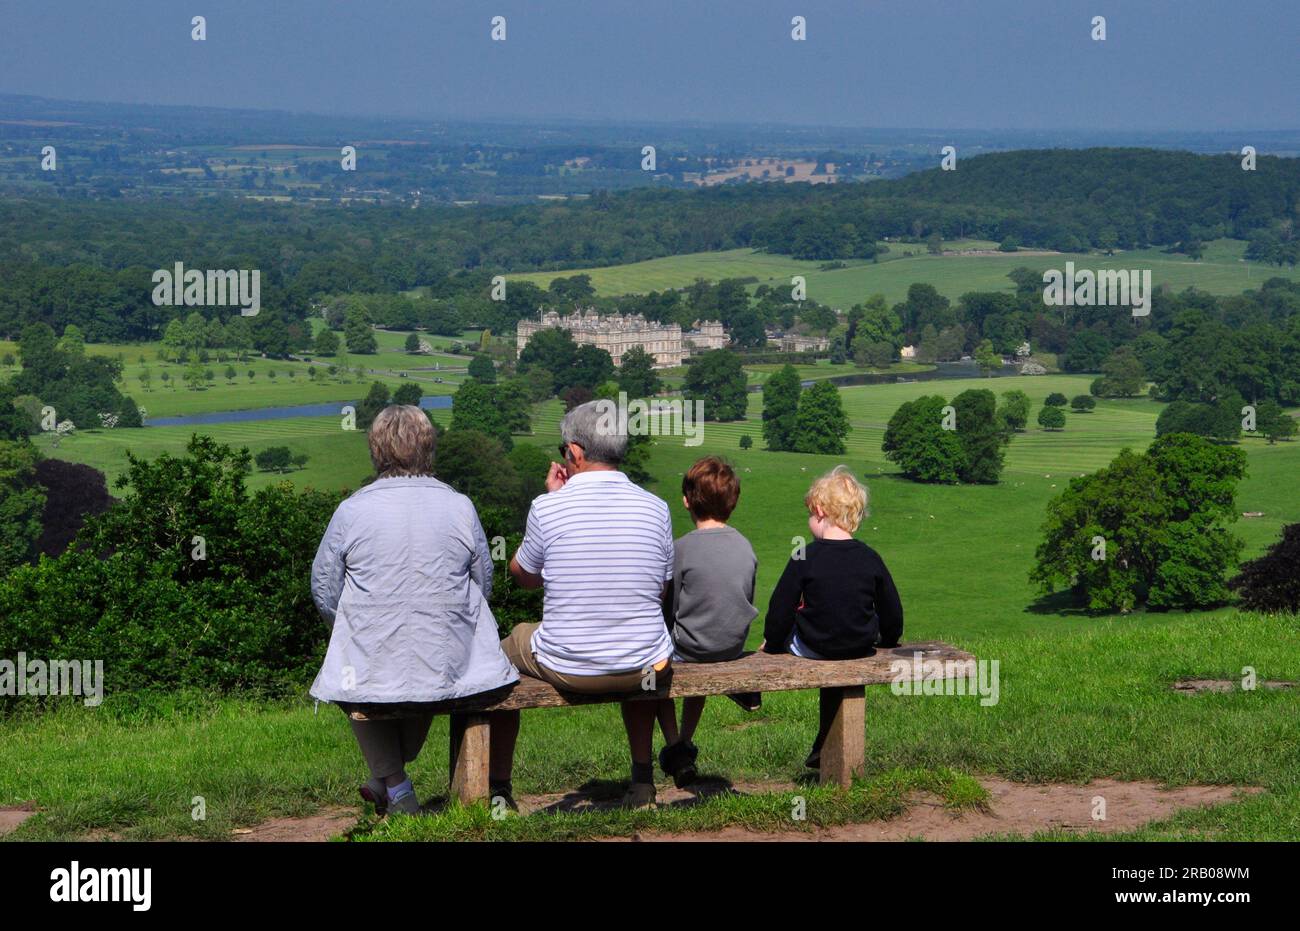 A family seated enjoying the magnificent view from Heavens Gate the hill overlooking Longleat the country home of Lord Bath in Wiltshire. Stock Photo